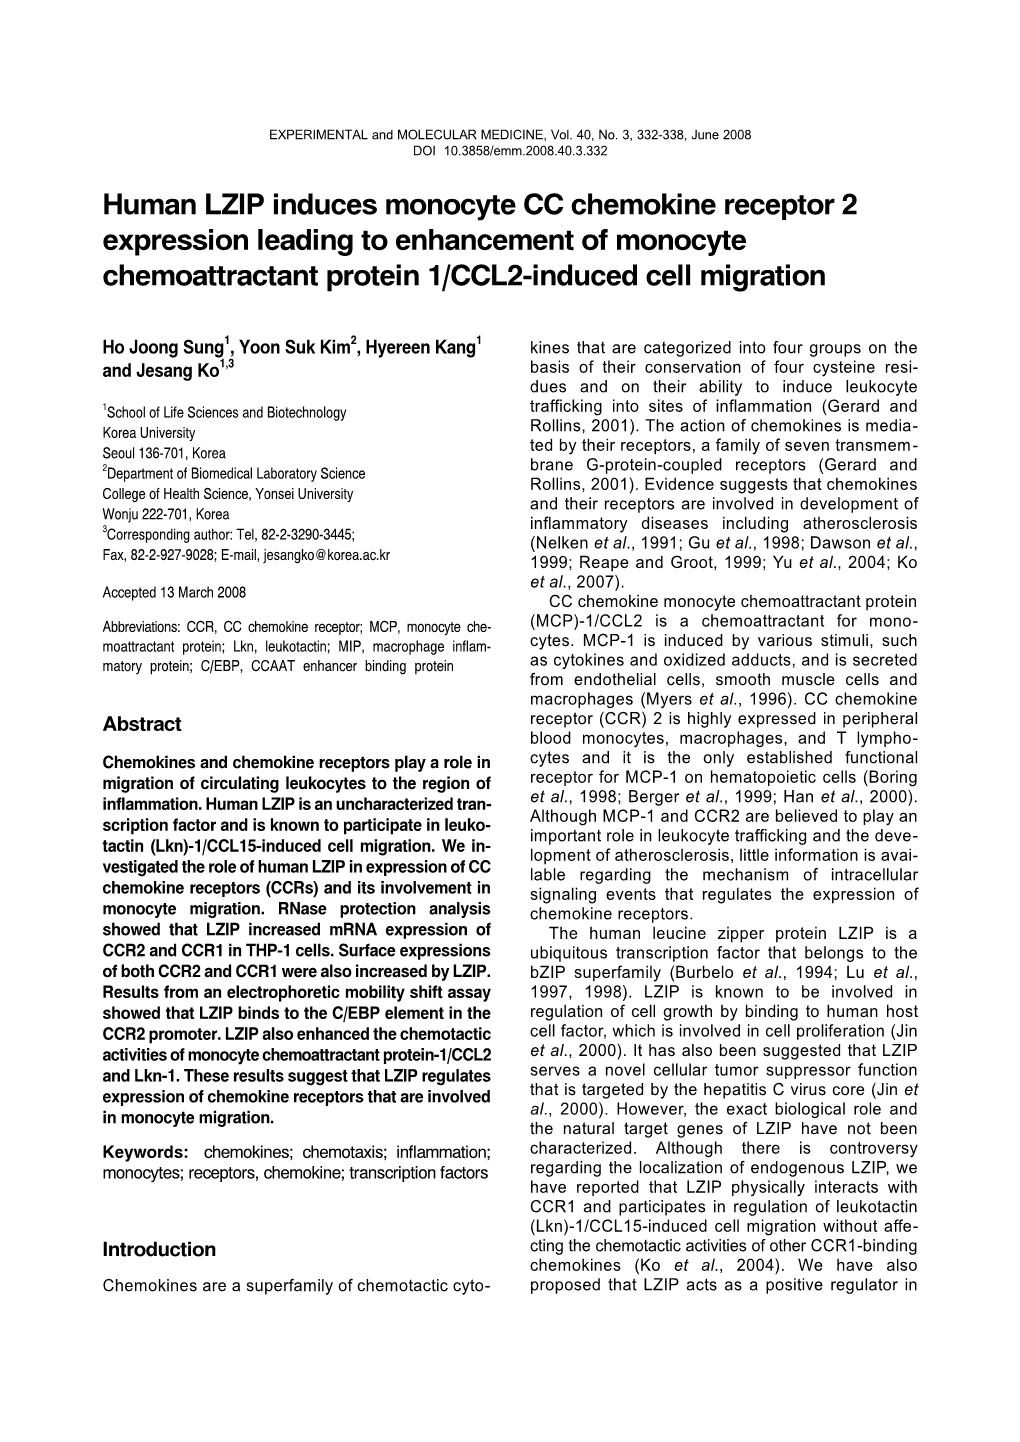 Human LZIP Induces Monocyte CC Chemokine Receptor 2 Expression Leading to Enhancement of Monocyte Chemoattractant Protein 1/CCL2-Induced Cell Migration